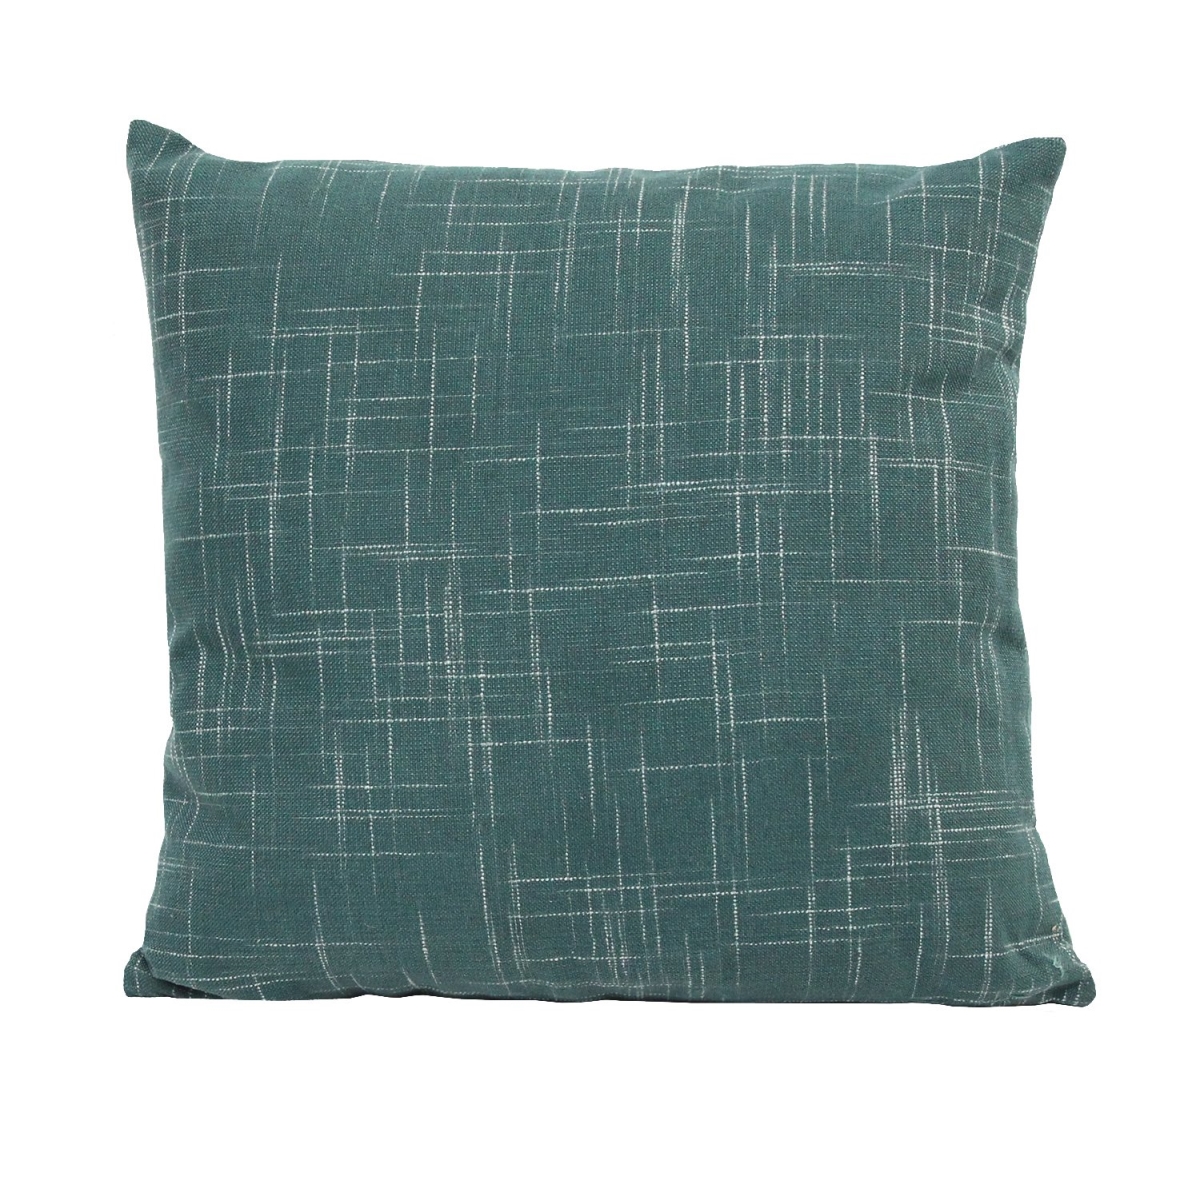 Home Roots Beddings 329358 Tweed Pillow, Teal